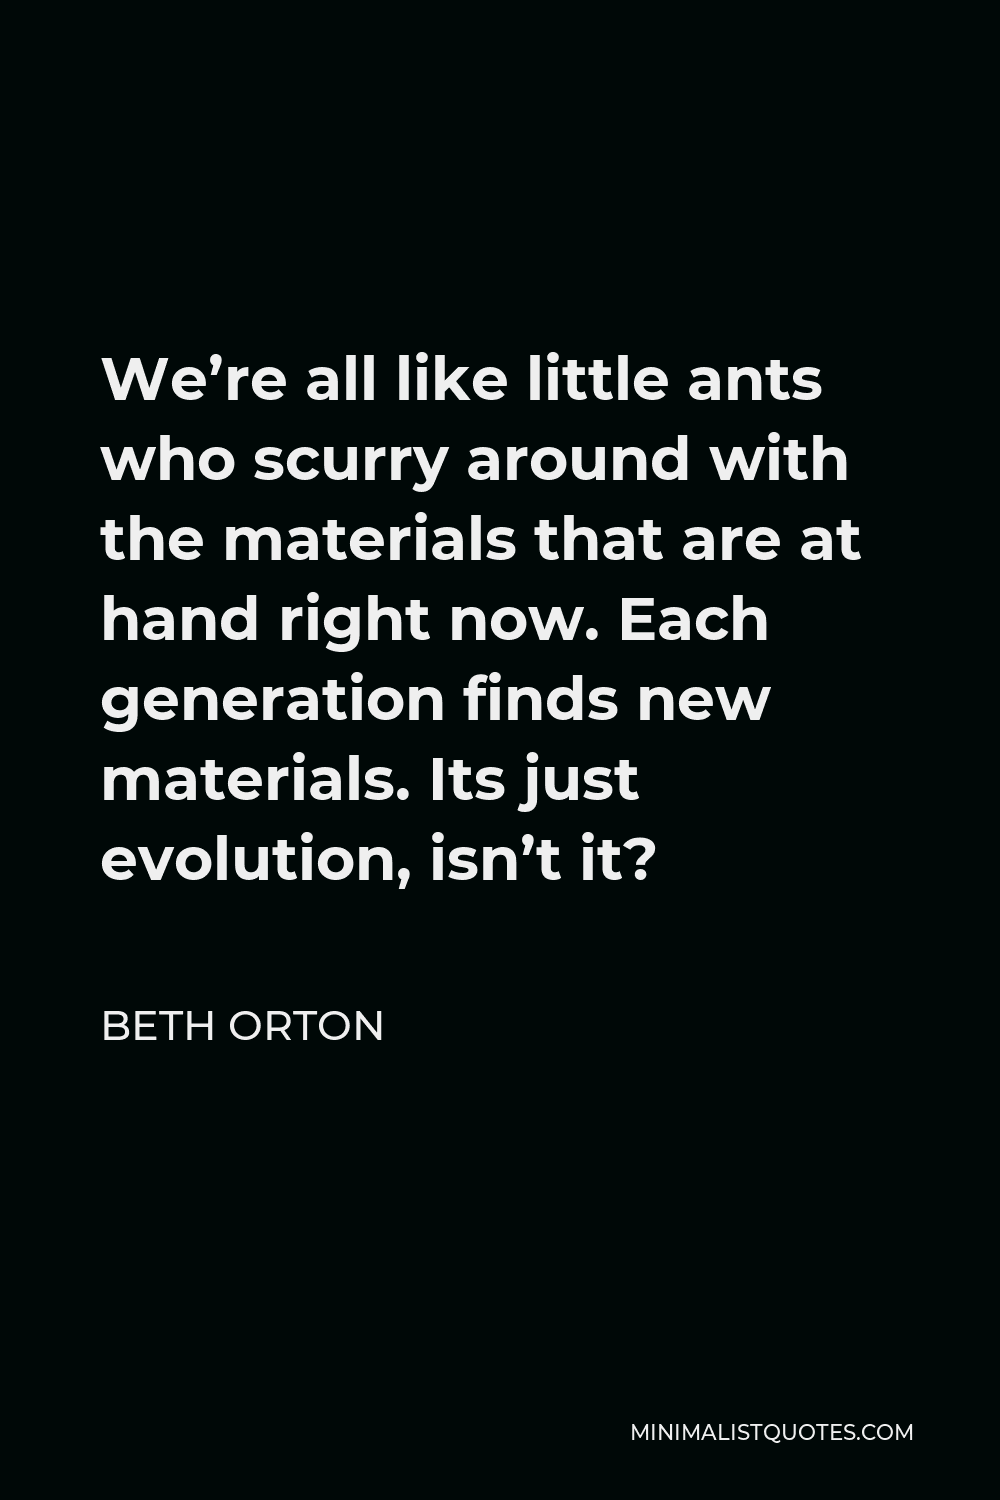 Beth Orton Quote - We’re all like little ants who scurry around with the materials that are at hand right now. Each generation finds new materials. Its just evolution, isn’t it?